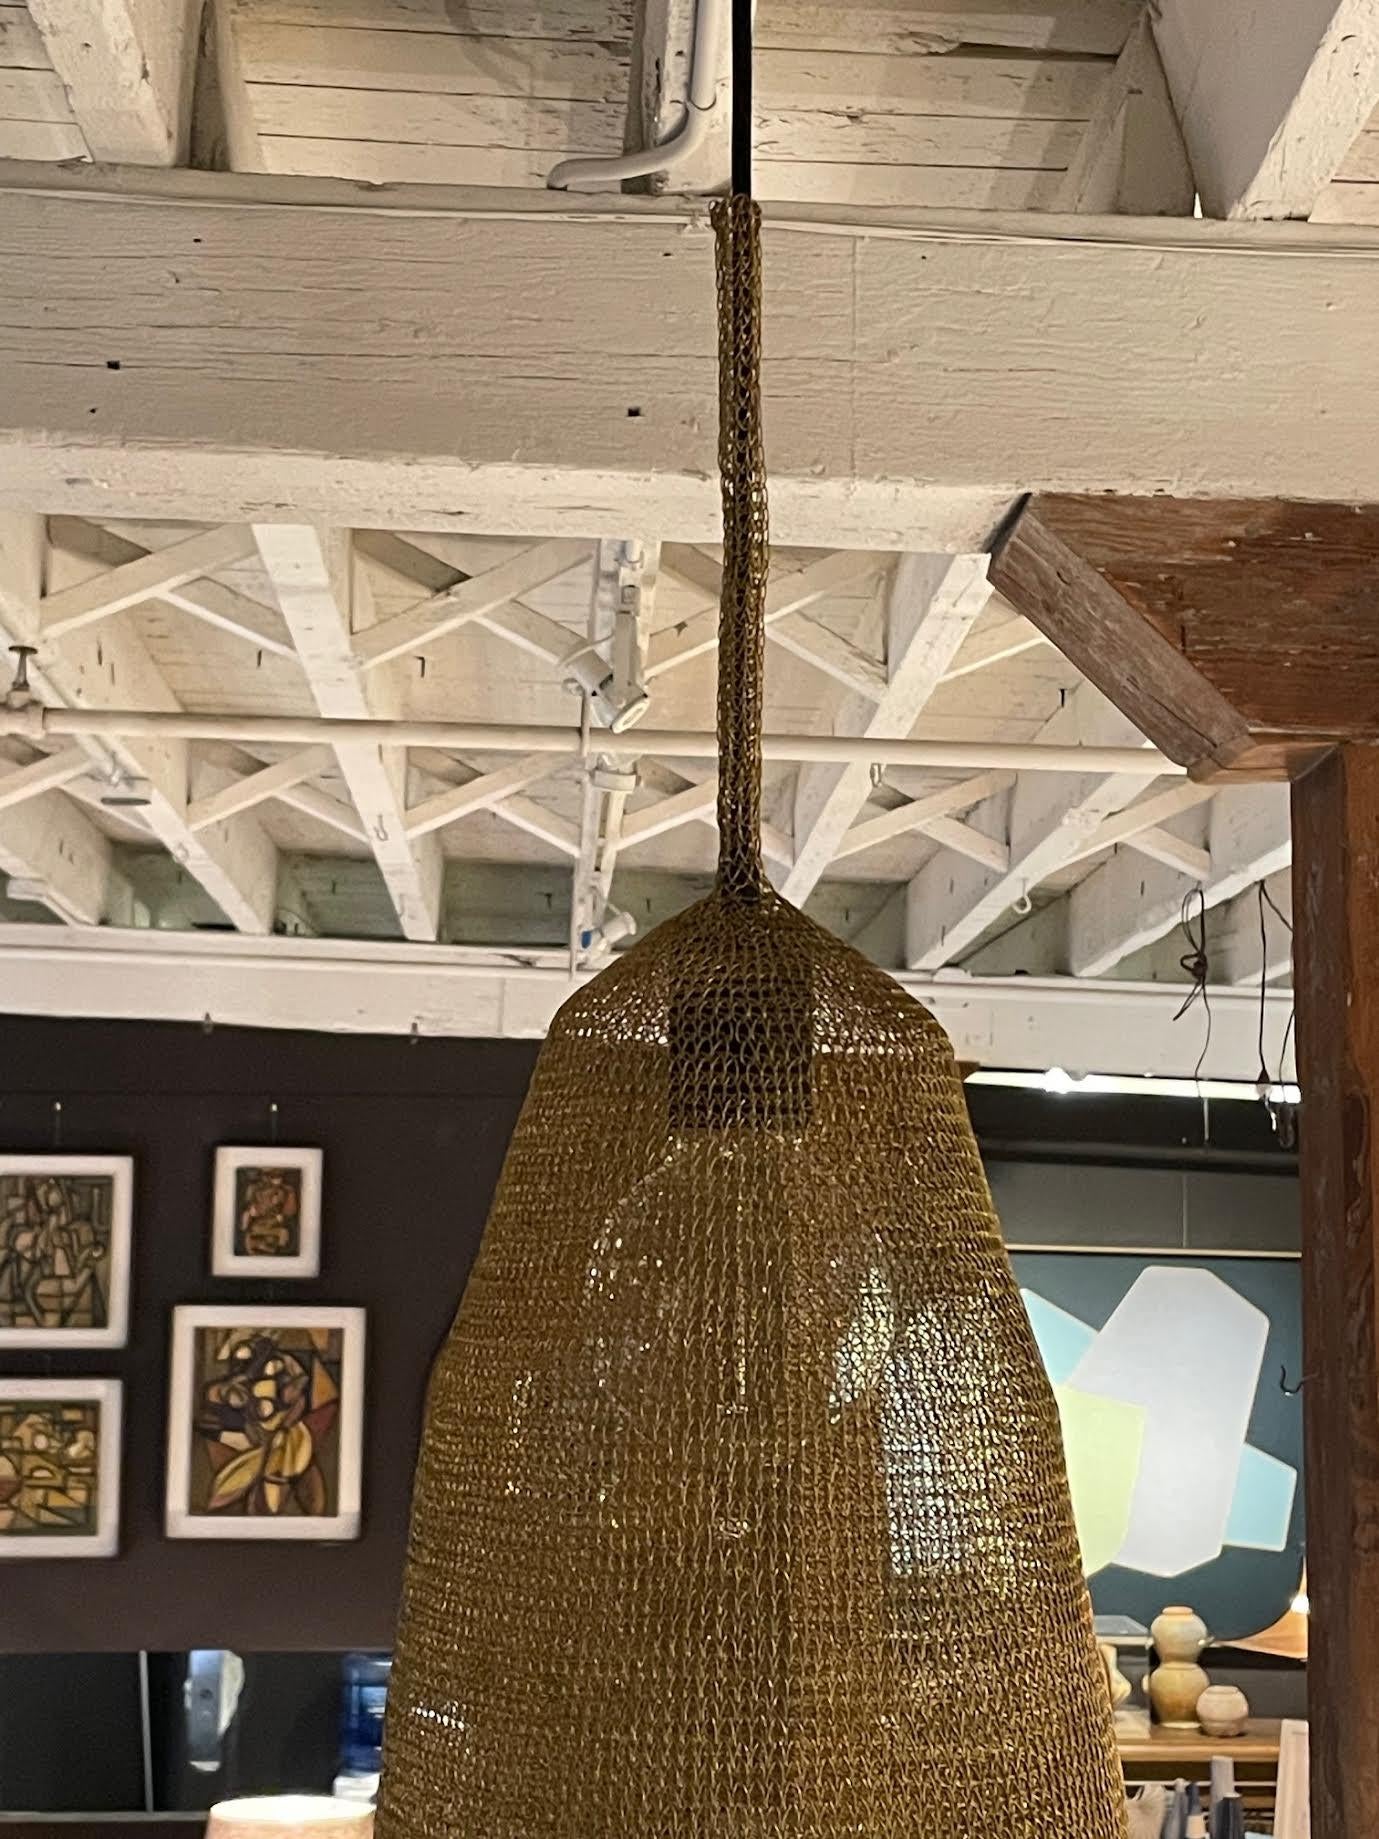 Brass Color Knitted Steel Mesh Pendant Light, Botswana, Contemporary In New Condition For Sale In New York, NY